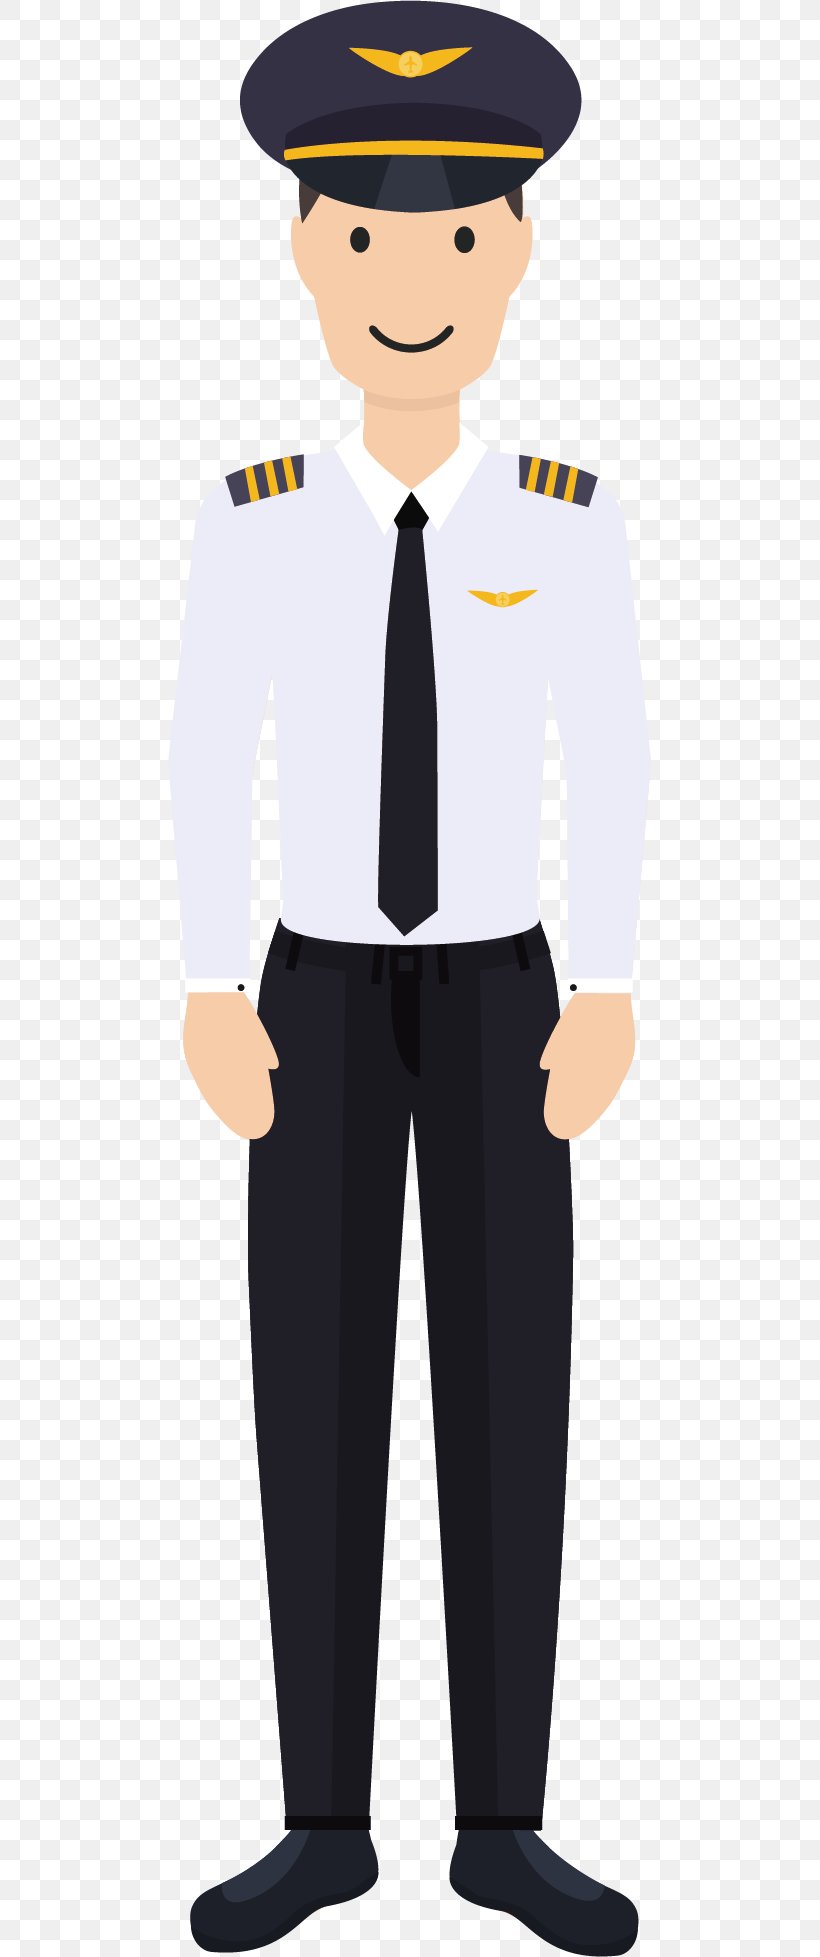 Airplane 0506147919, PNG, 483x1957px, Airplane, Animation, Business, Businessperson, Cartoon Download Free